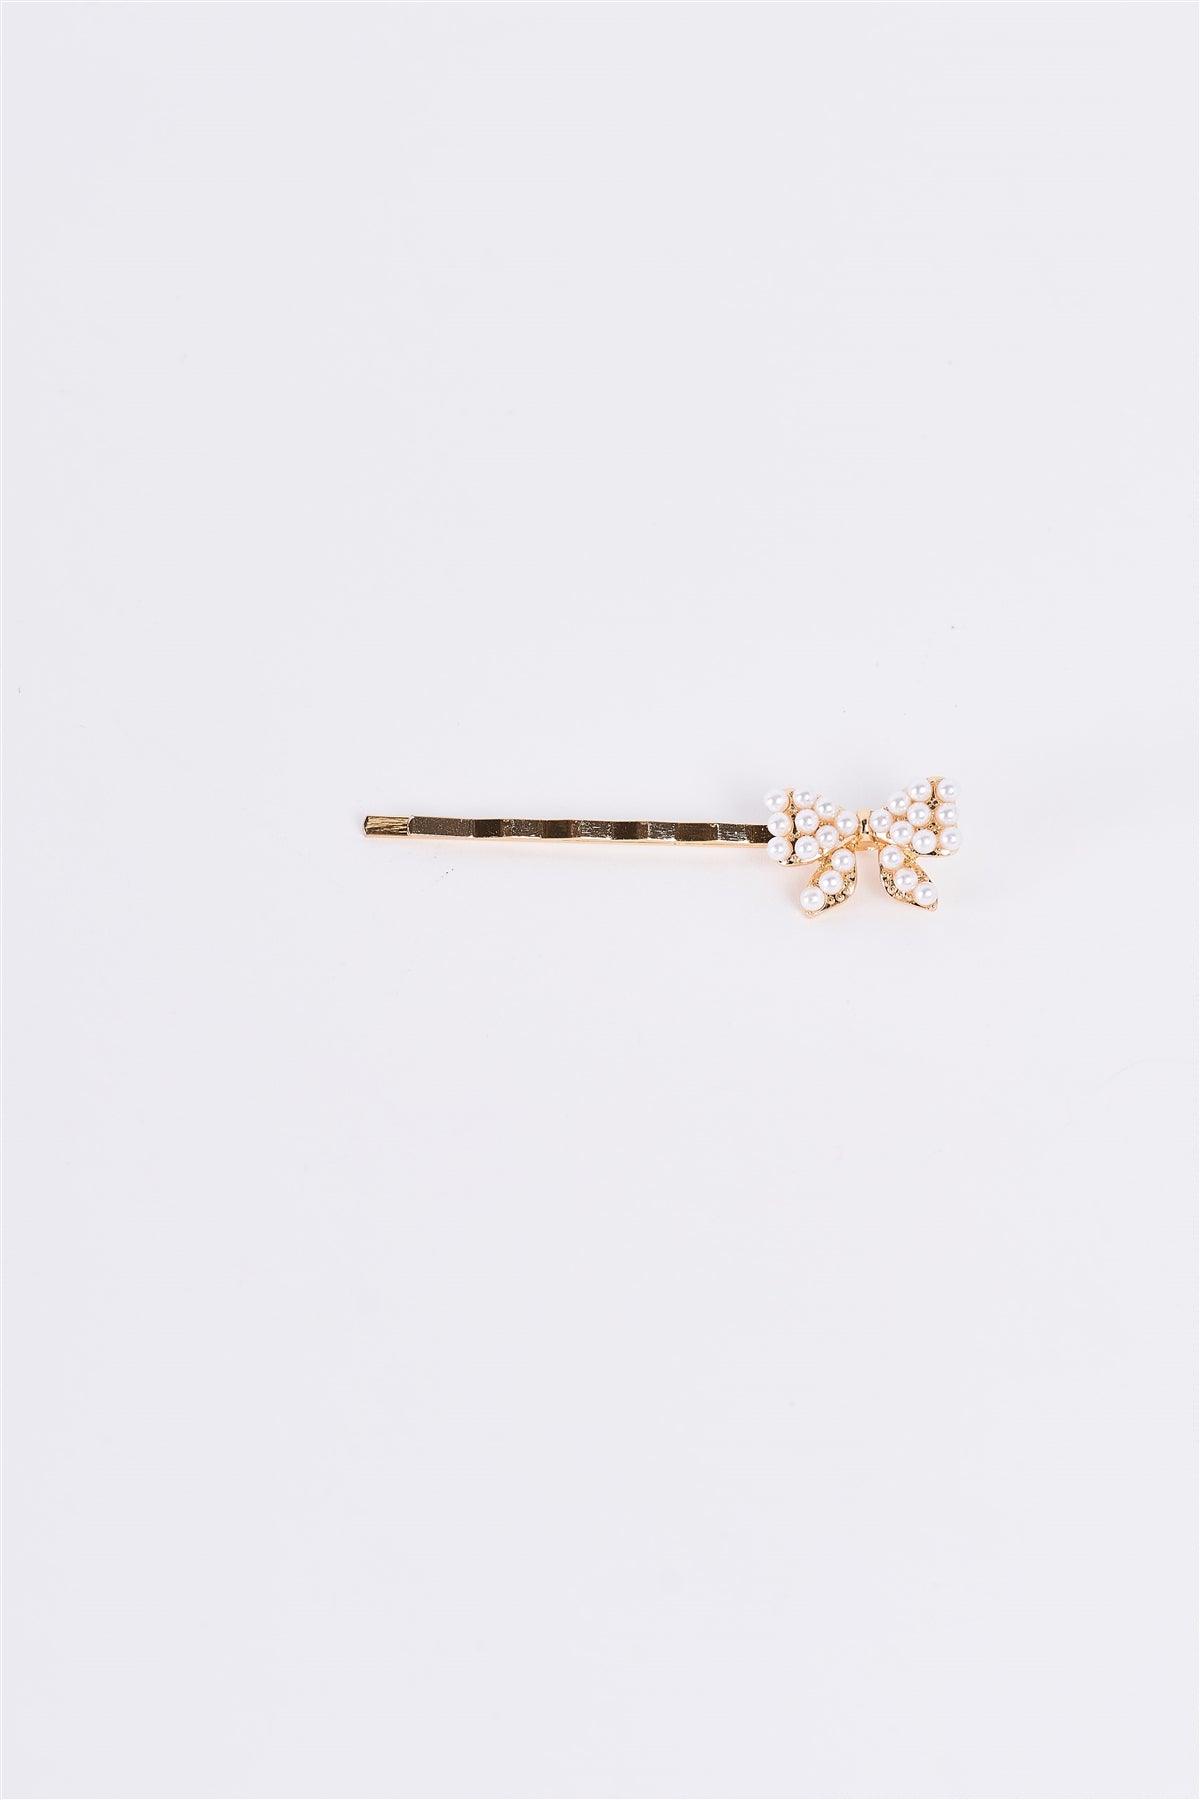 Gold & Pearl Bow Tiny Bobby Pin/ 3 Pieces